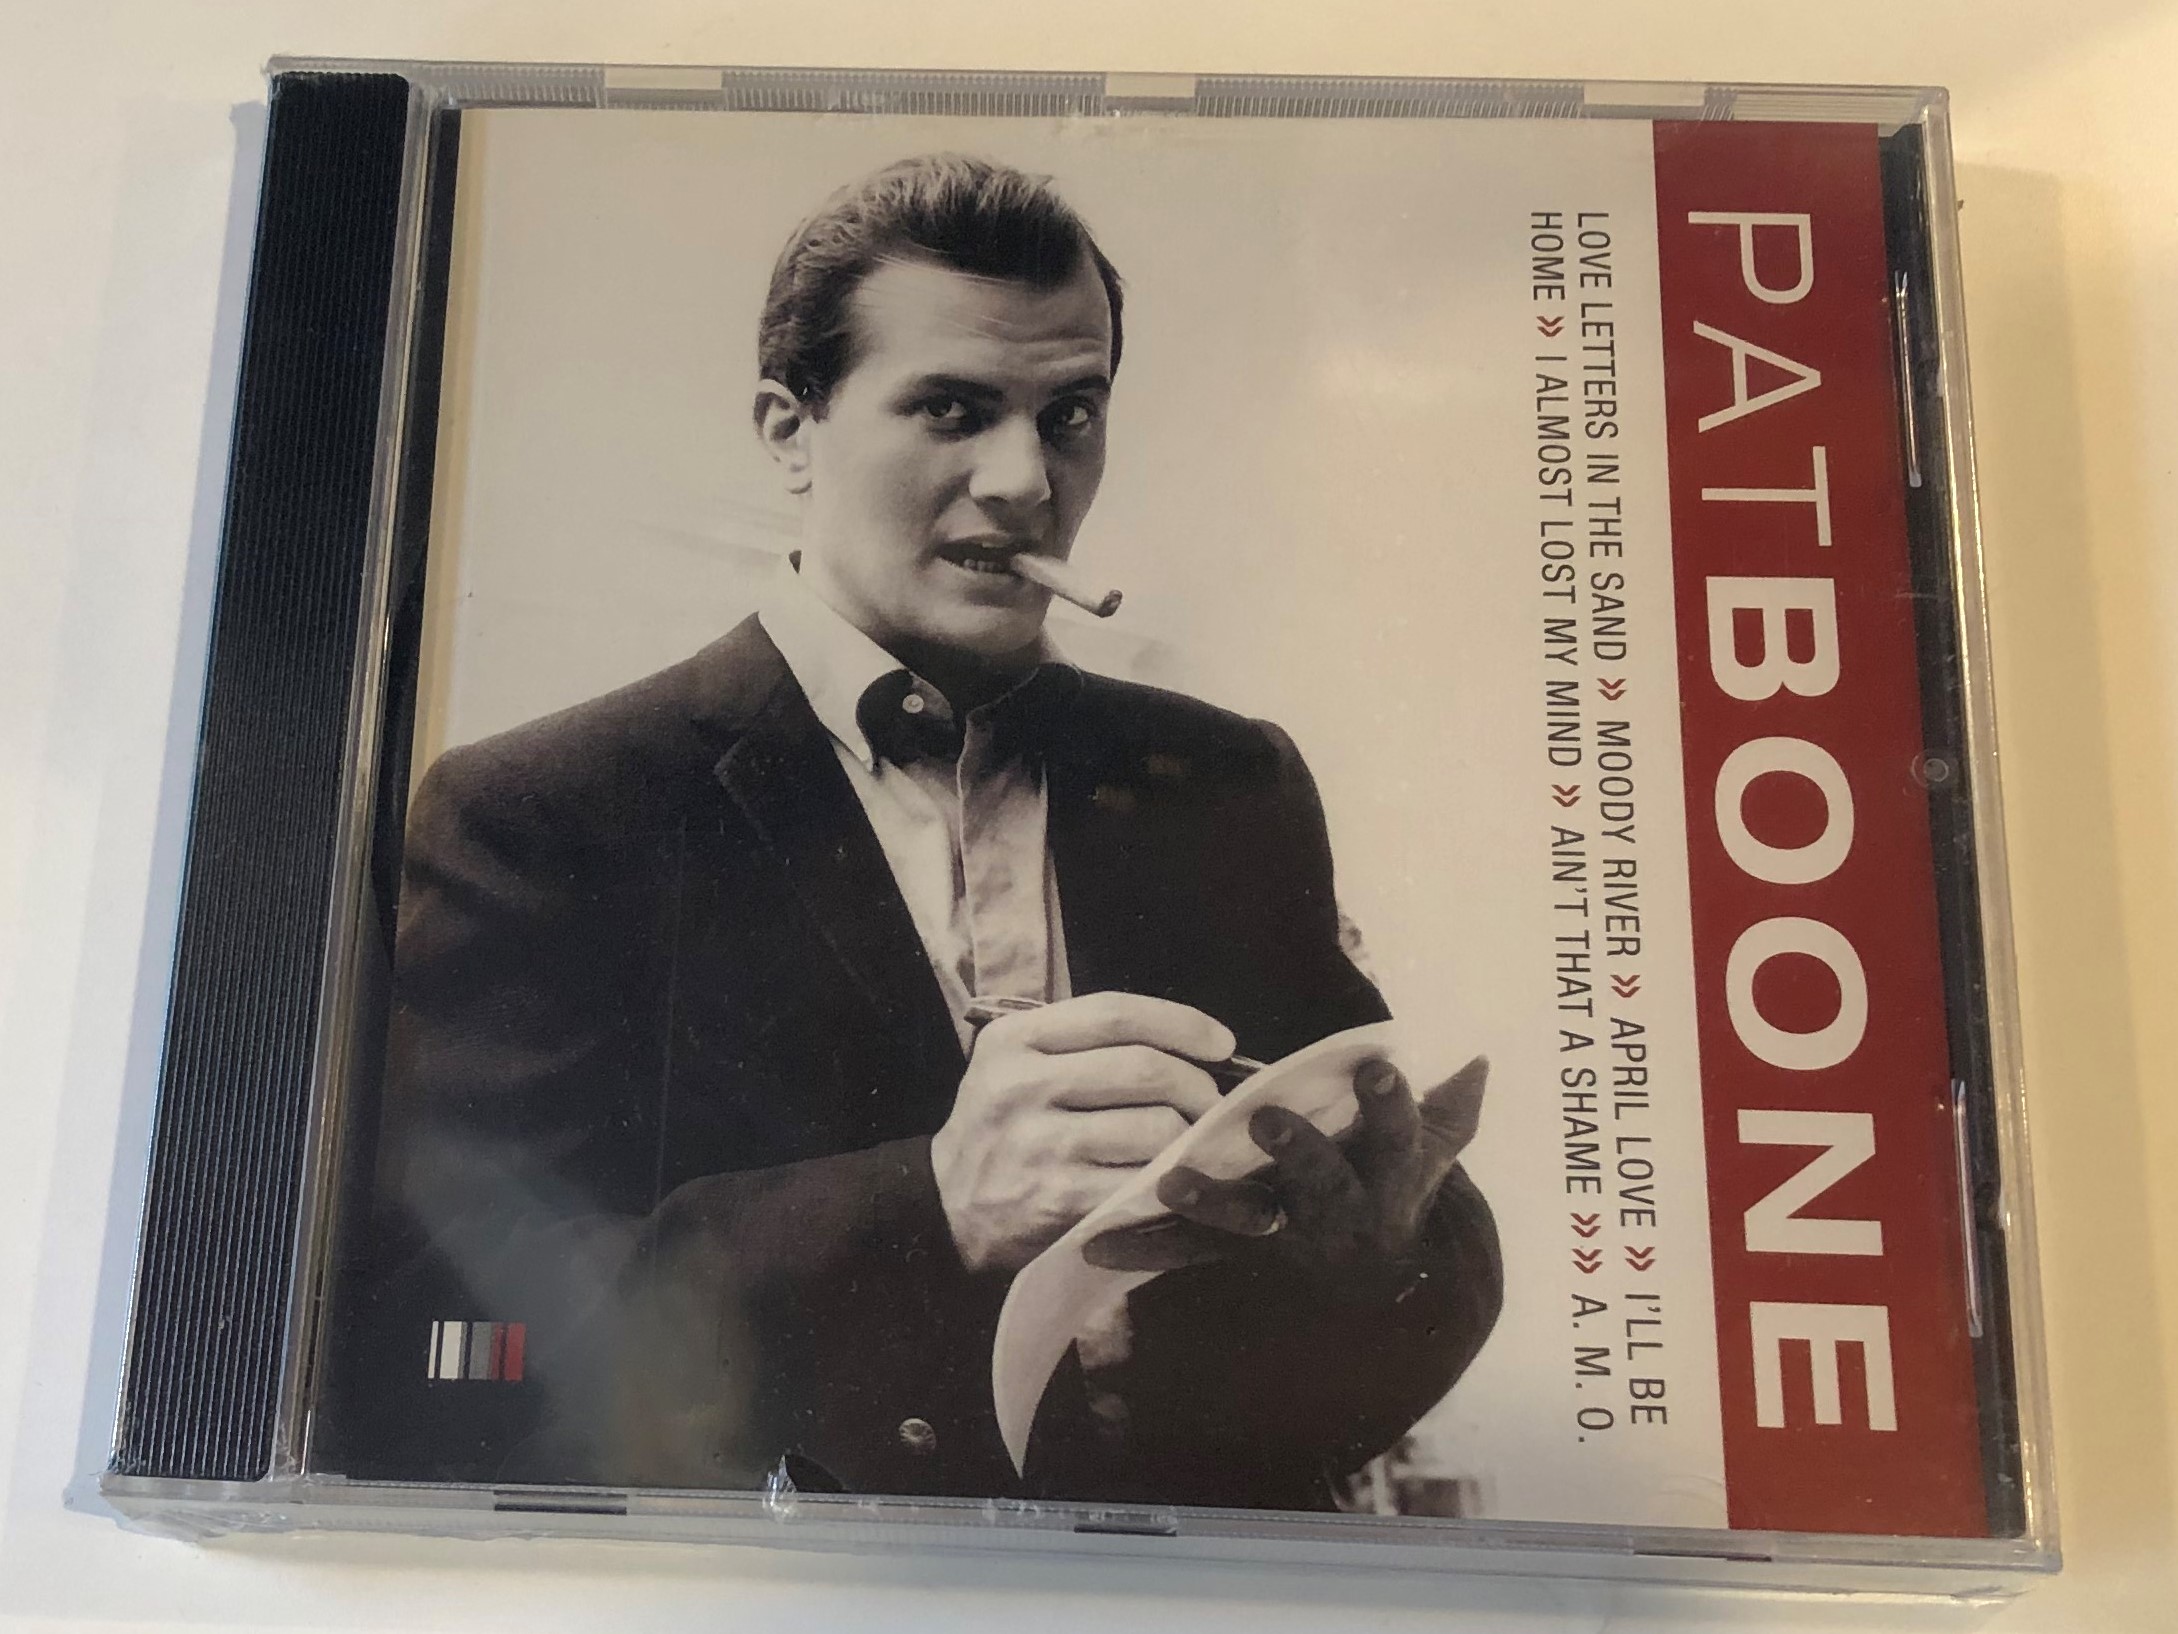 pat-boone-love-letters-in-the-sand-moody-river-april-love-i-ll-be-home-i-almost-lost-my-mind-ain-t-that-a-shame-a.-m.-o.-fox-music-audio-cd-fu-1013-1-.jpg